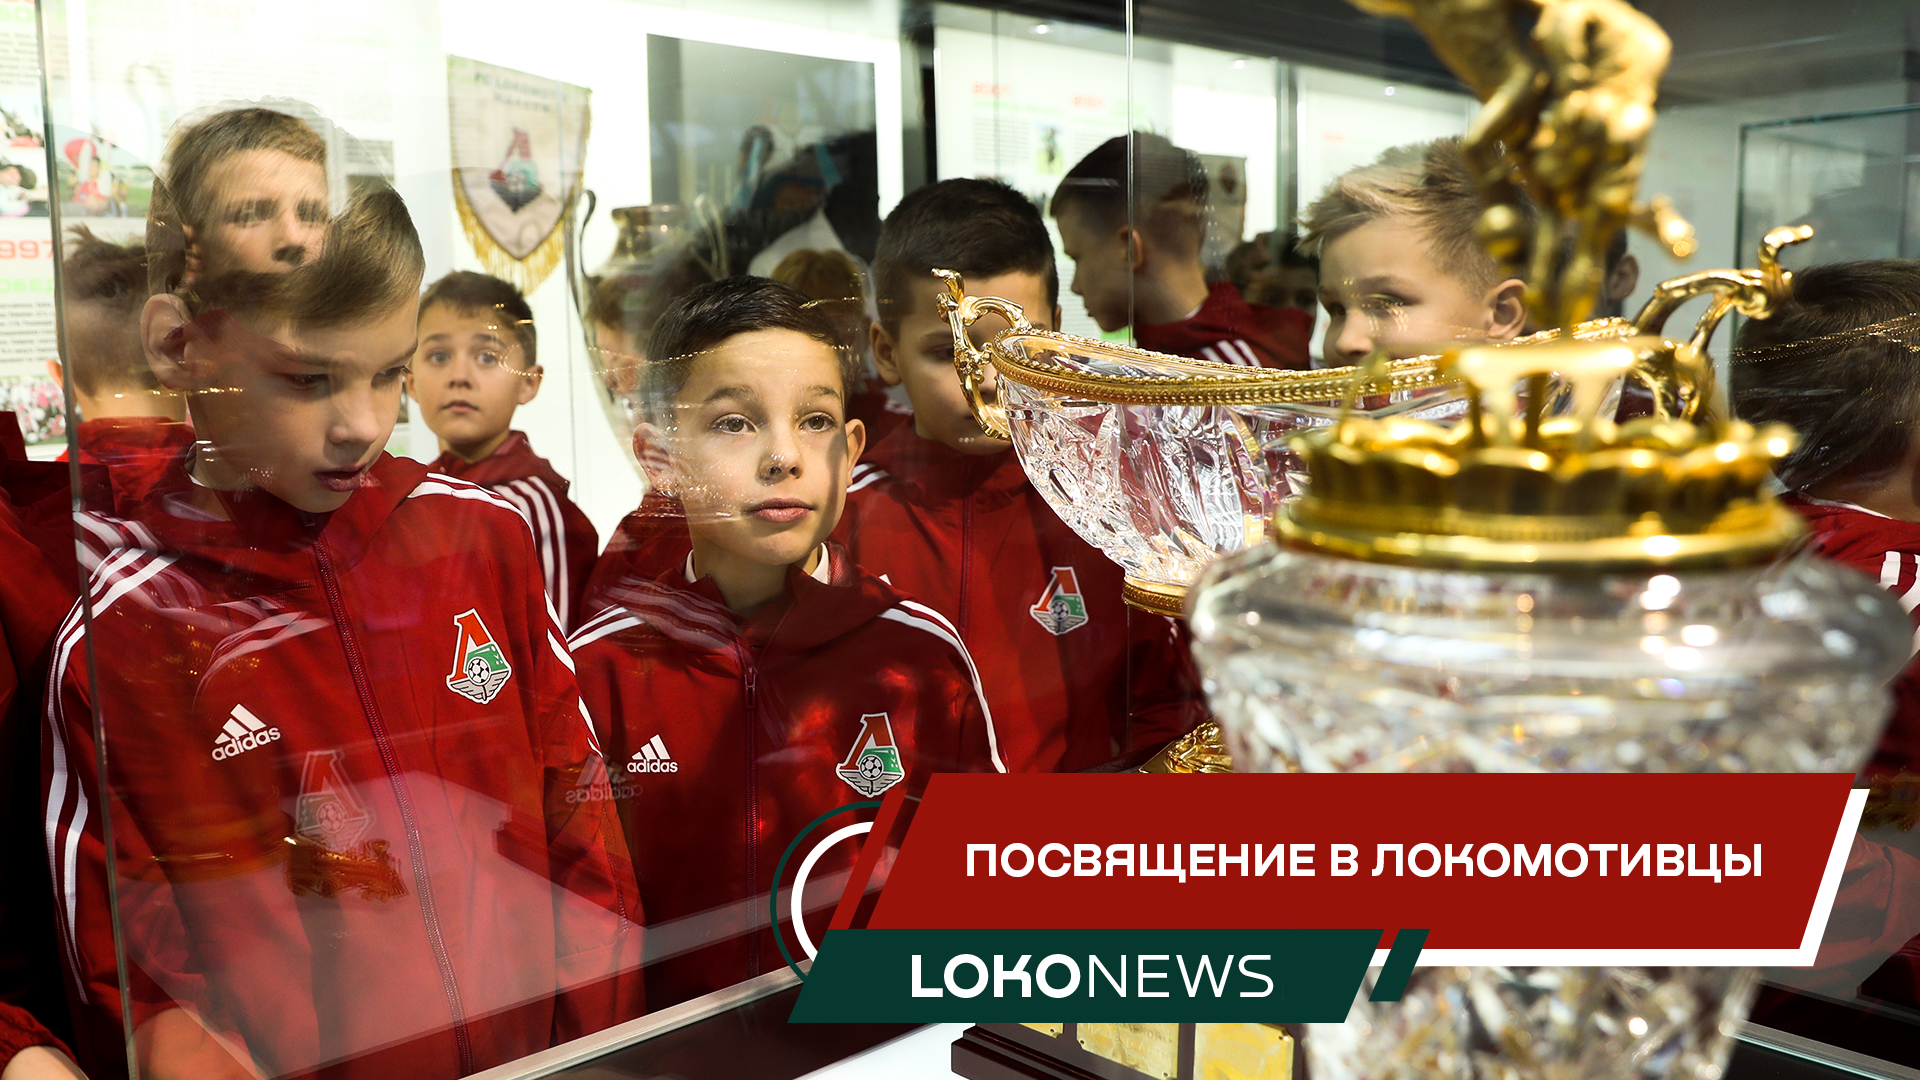 Football players born in 2012 joined FC Lokomotiv